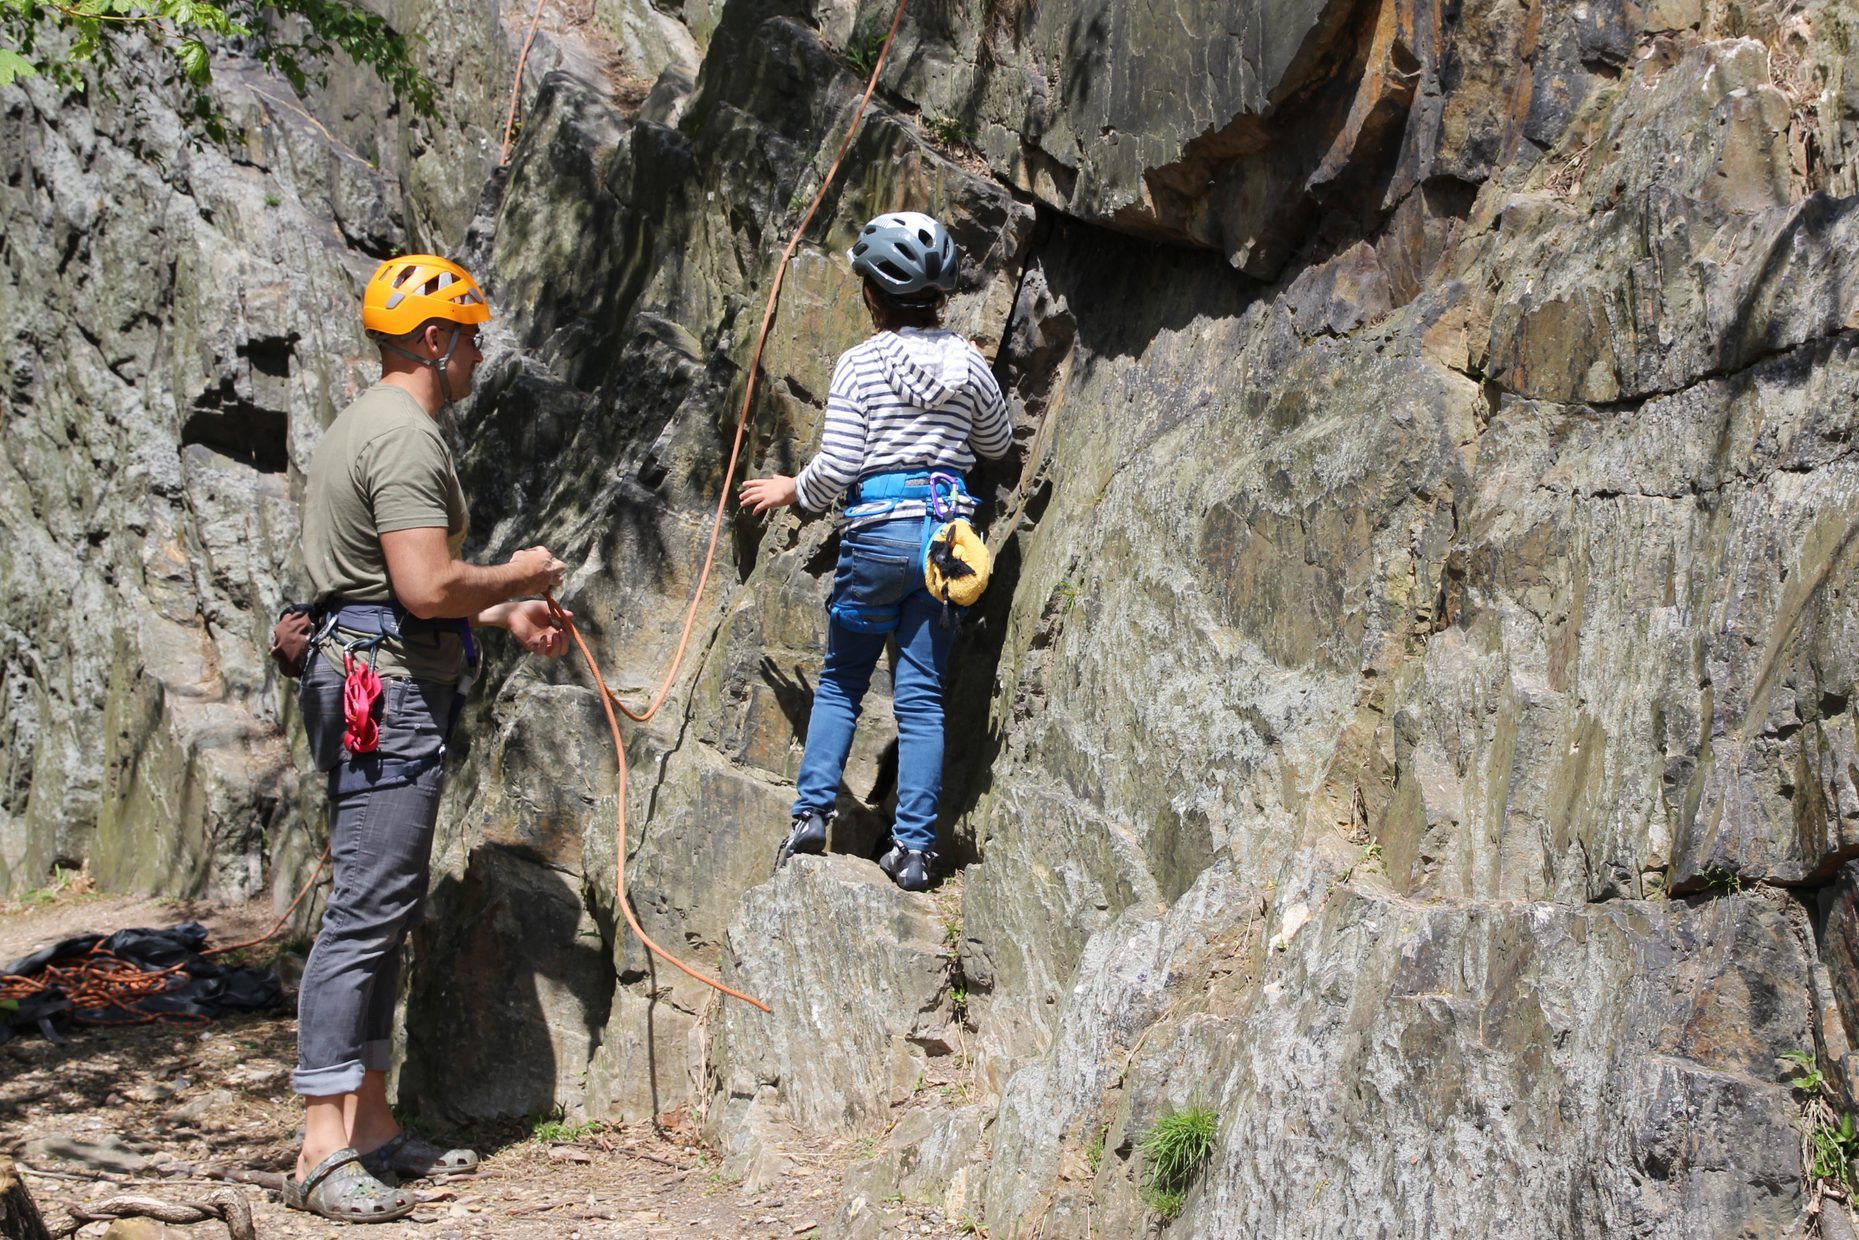 Dad setting up ropes for his daughter to rock climb